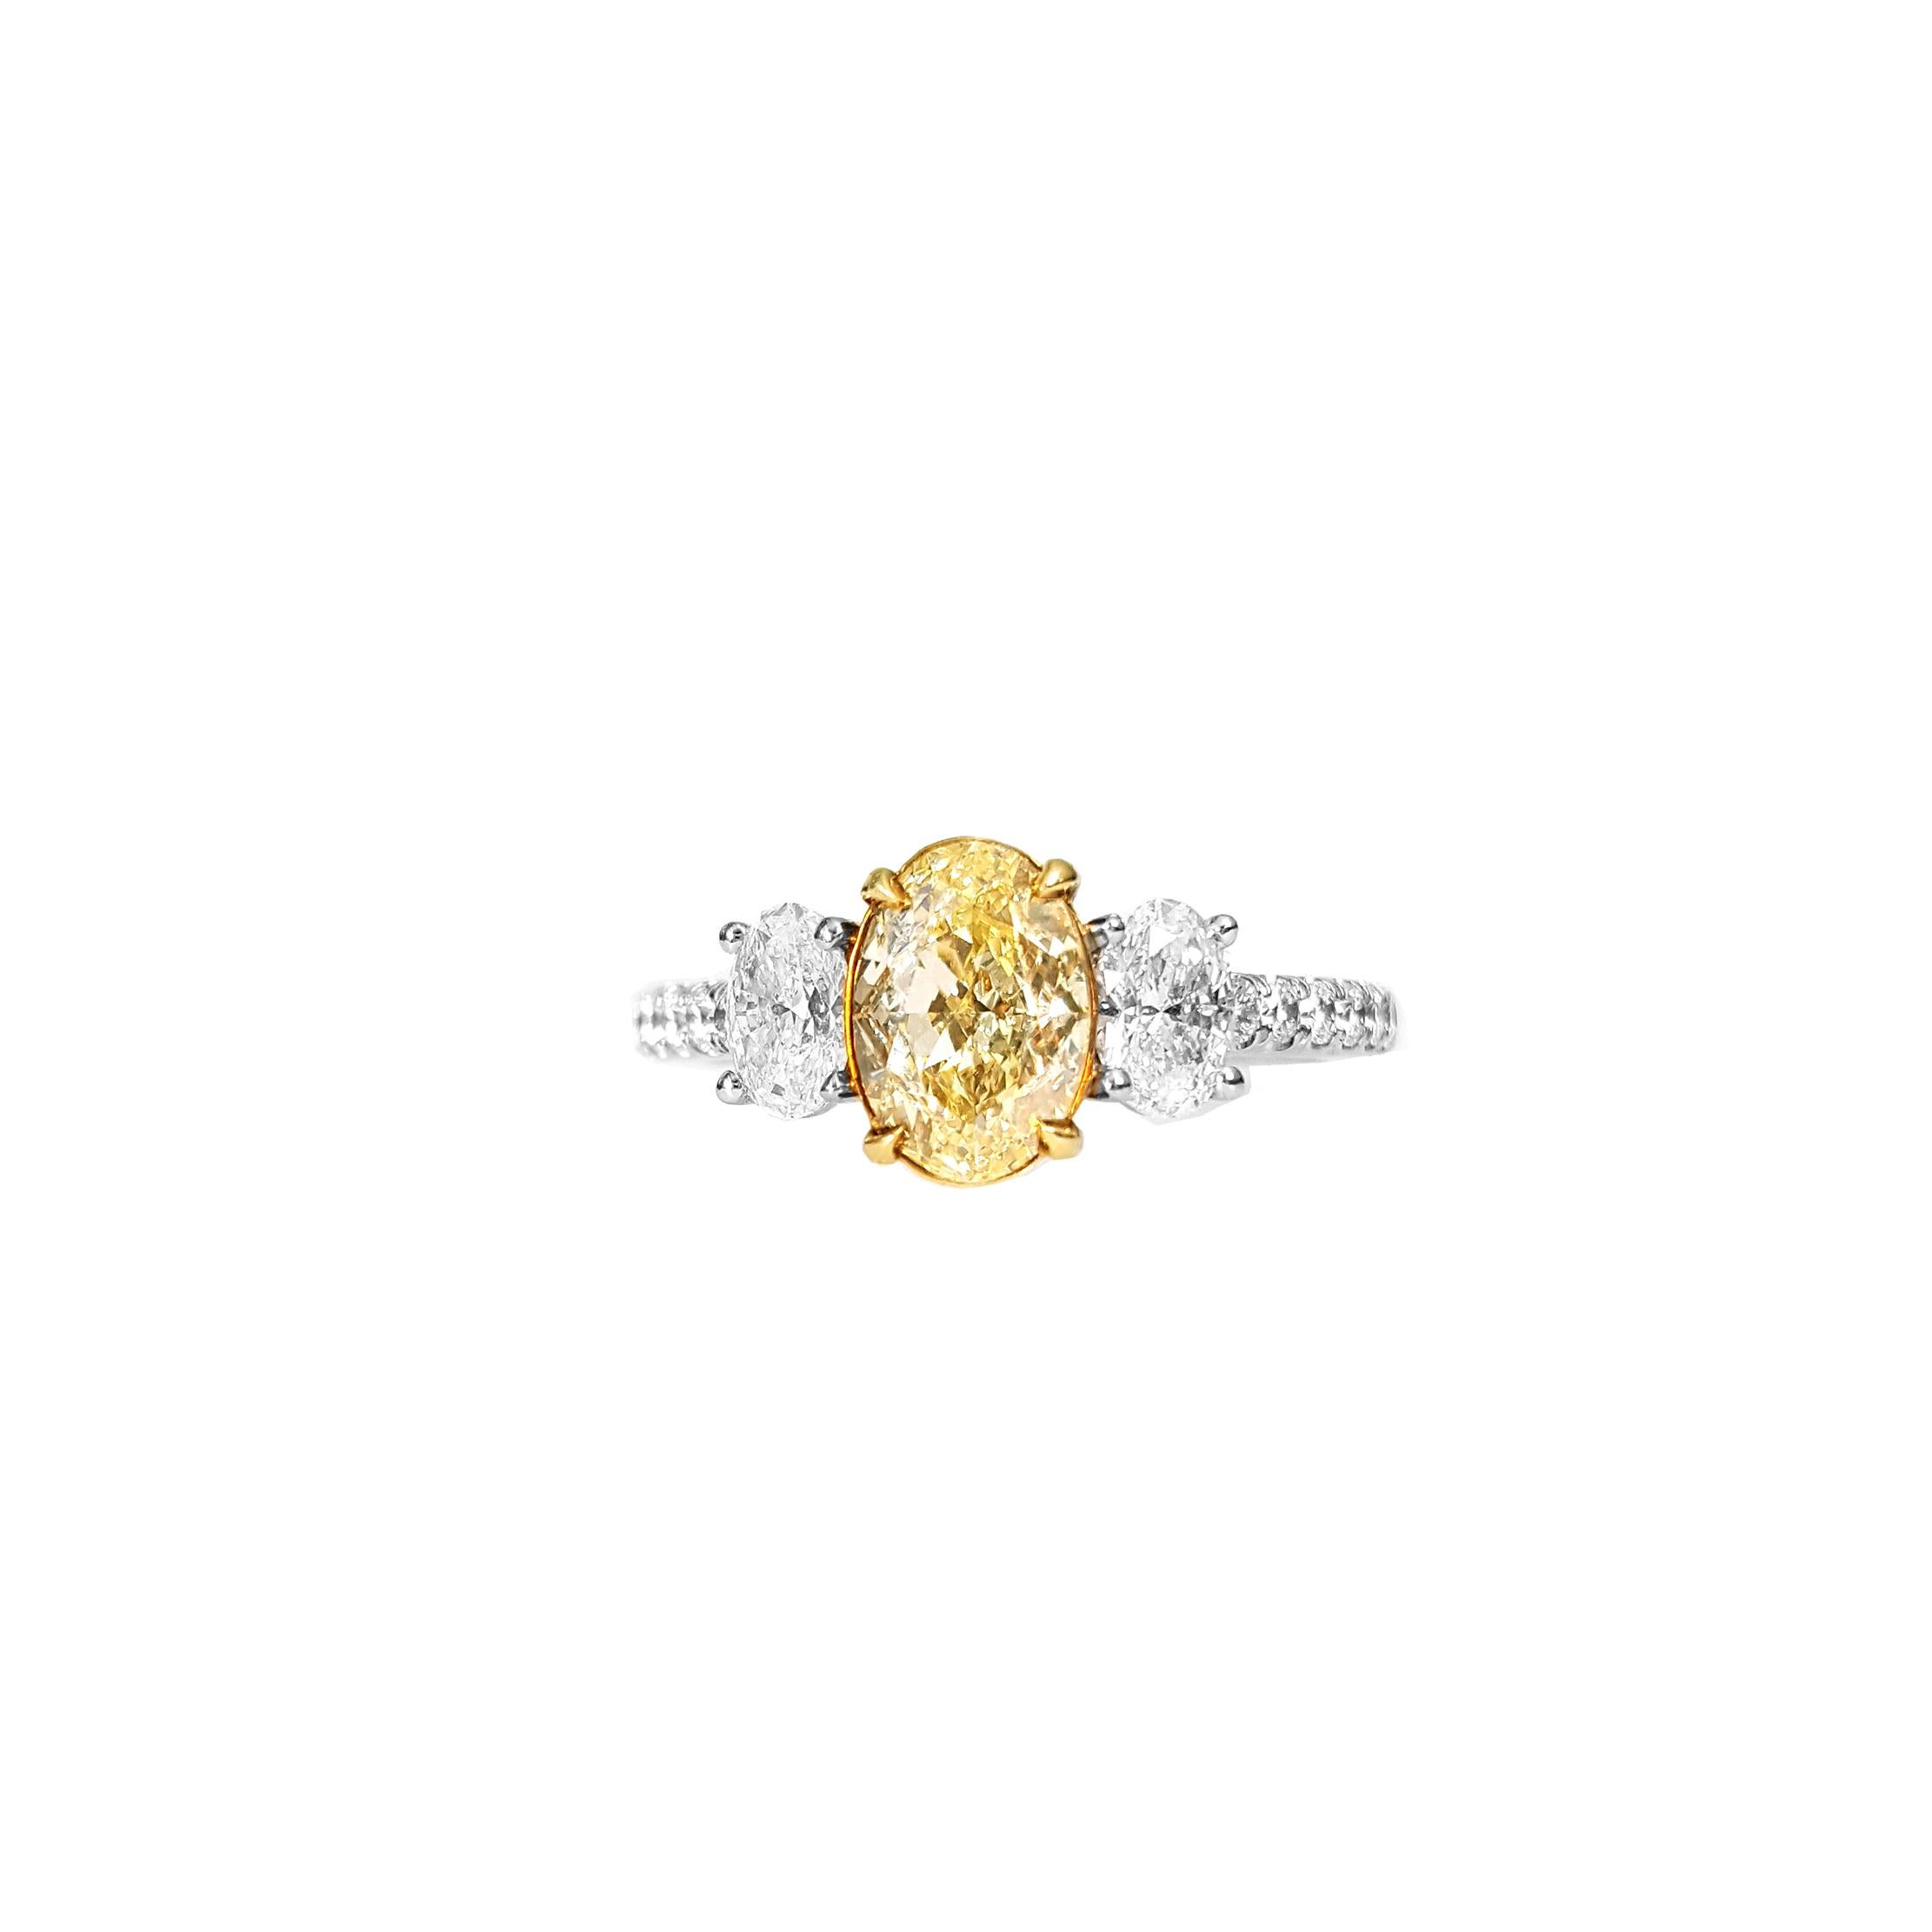 Presenting an exquisite Three-Stone Engagement Ring showcasing a 1.30-carat Fancy Yellow, oval-cut diamond. GIA certified this diamond as VS1 in clarity. The stones exhibit an excellent polish and a Very Good symmetry, ensuring a dazzling and